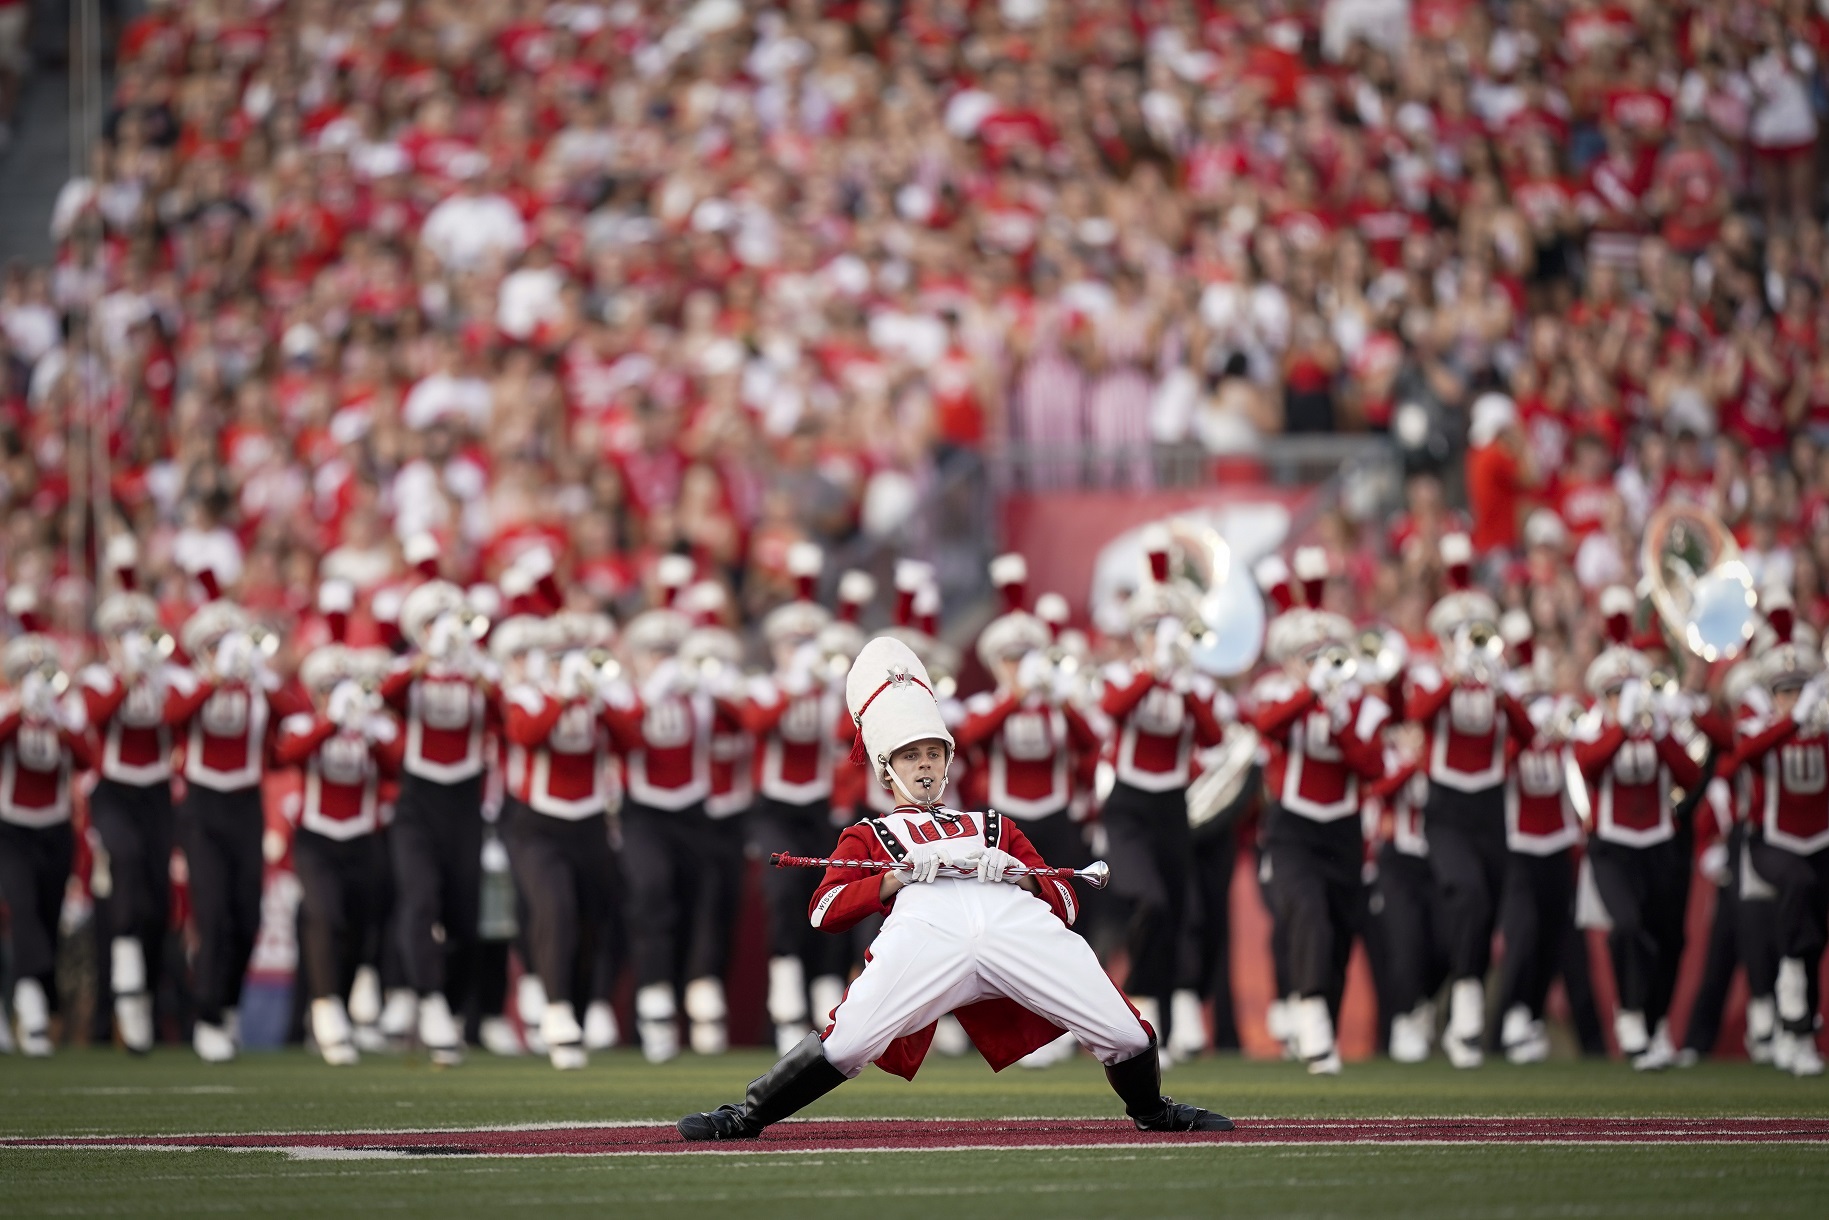 Police: 45 people ejected, 32 arrested during Badgers game